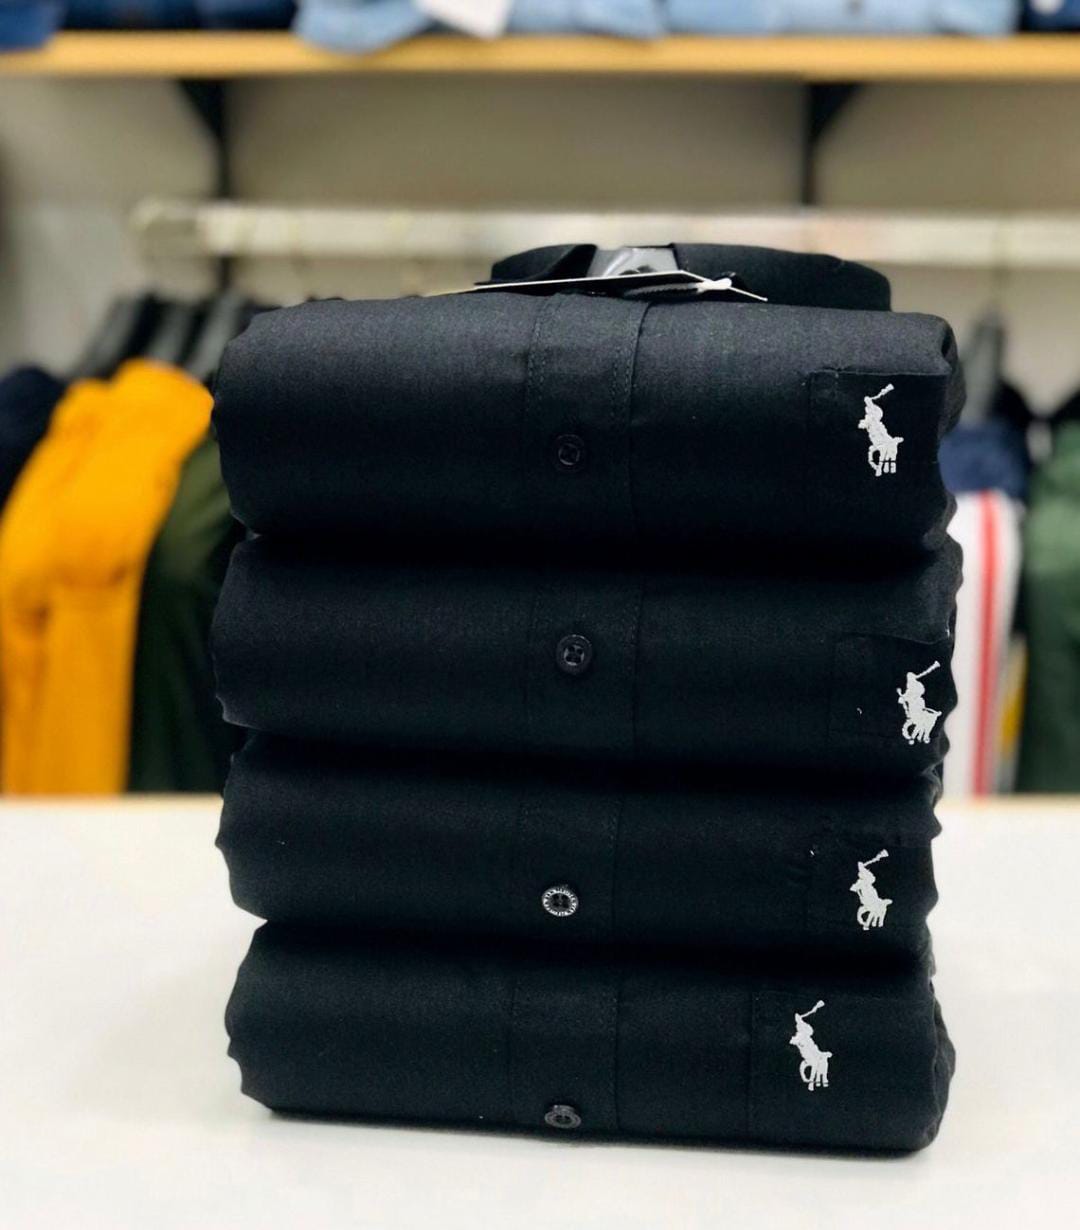 Details View - US Polo SHIRT photos - reseller,reseller marketplace,advetising your products,reseller bazzar,resellerbazzar.in,india's classified site,US Polo SHIRT | US Polo SHIRT In Ahmedabad | us polo shirts below 500 | US Polo SHIRT In Surat